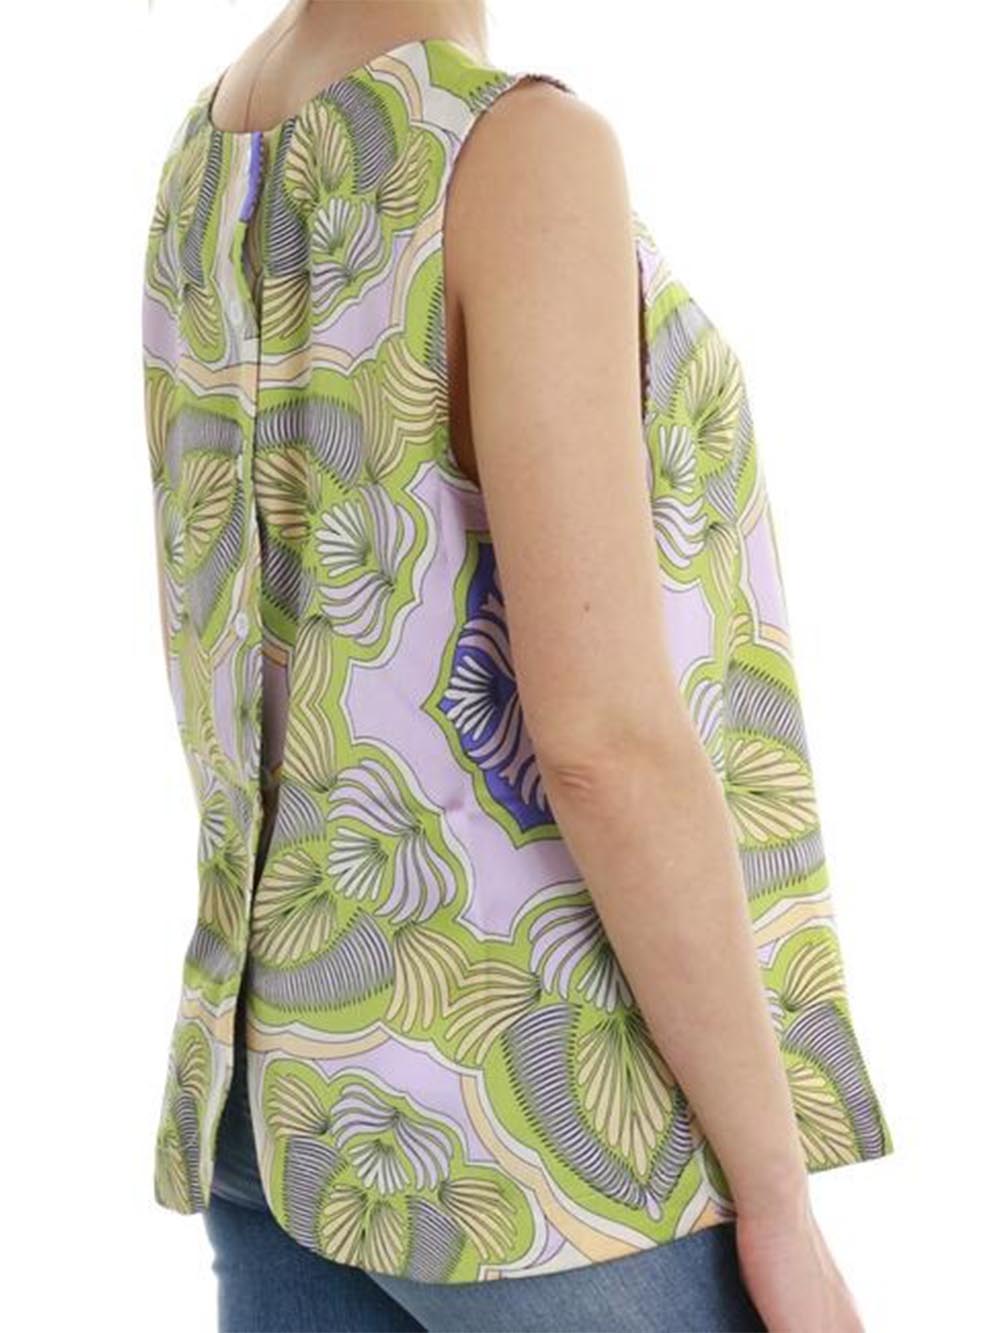 ANONYME Top Donna Tunde A144st057 Verde